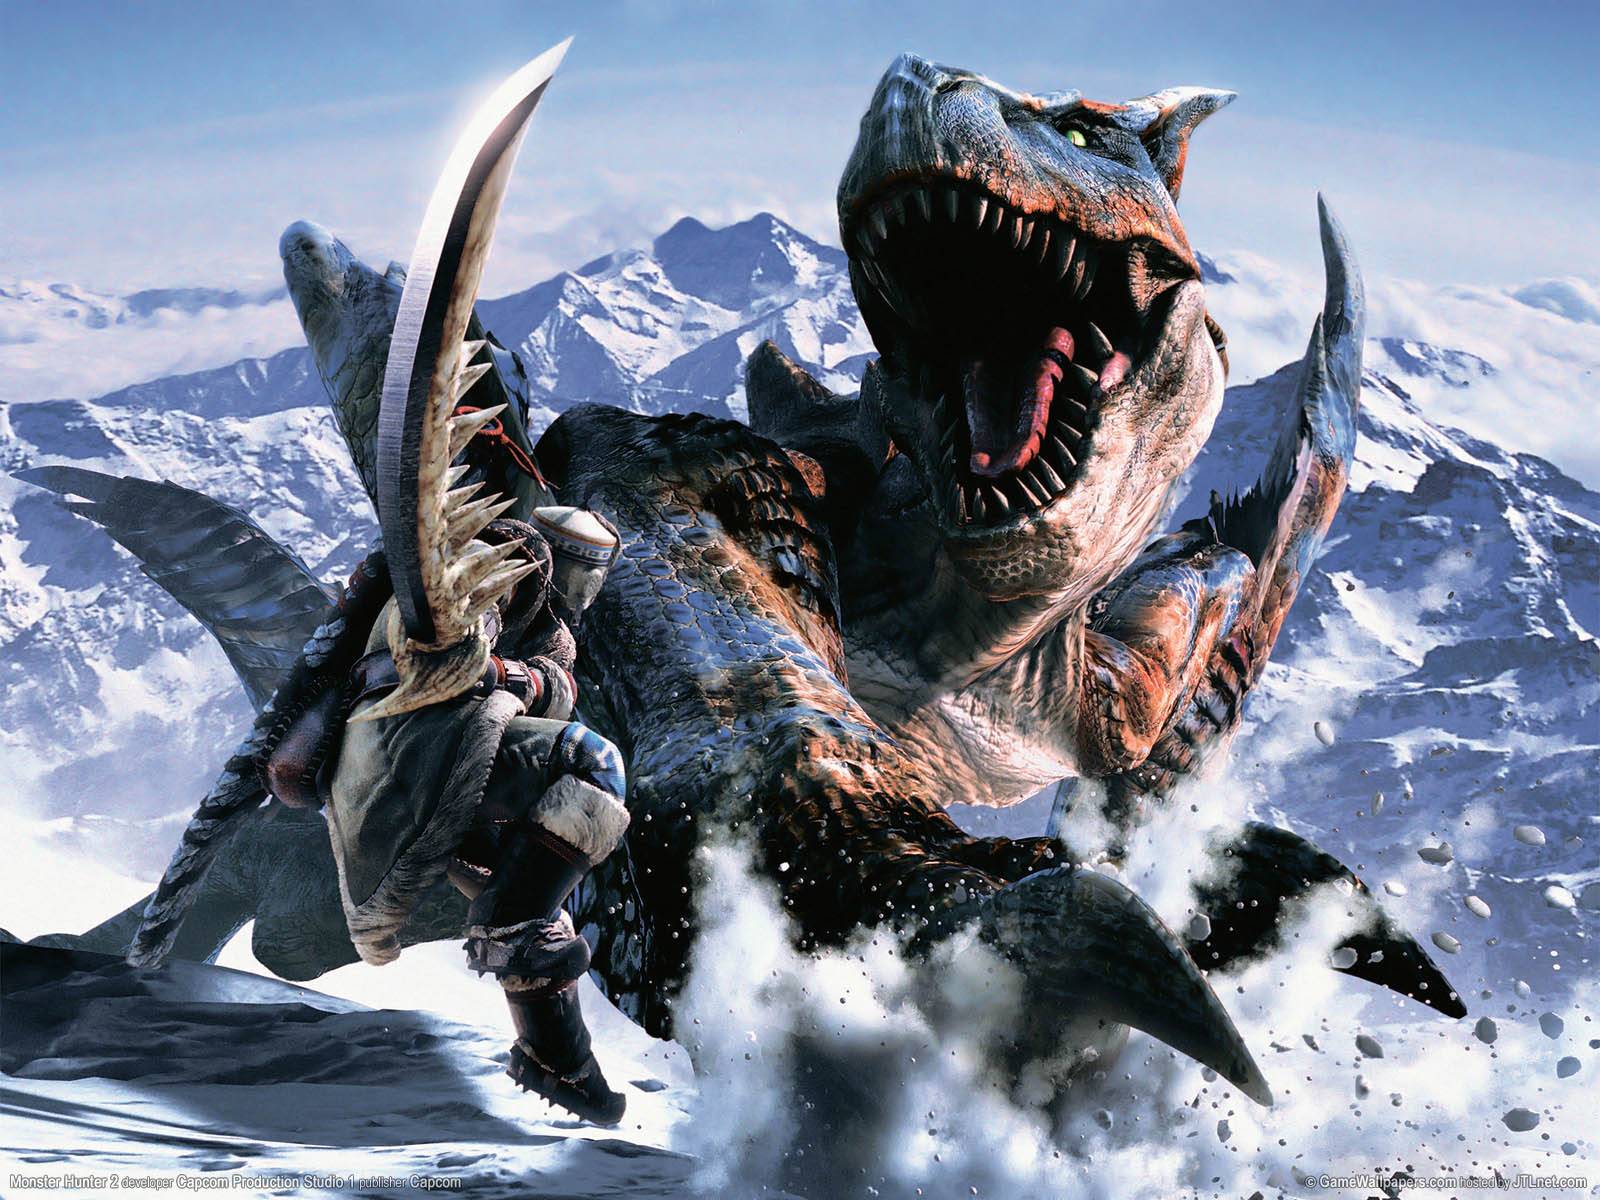 Monster Hunter 4 Wallpapers In HD « GamingBolt: Video Game